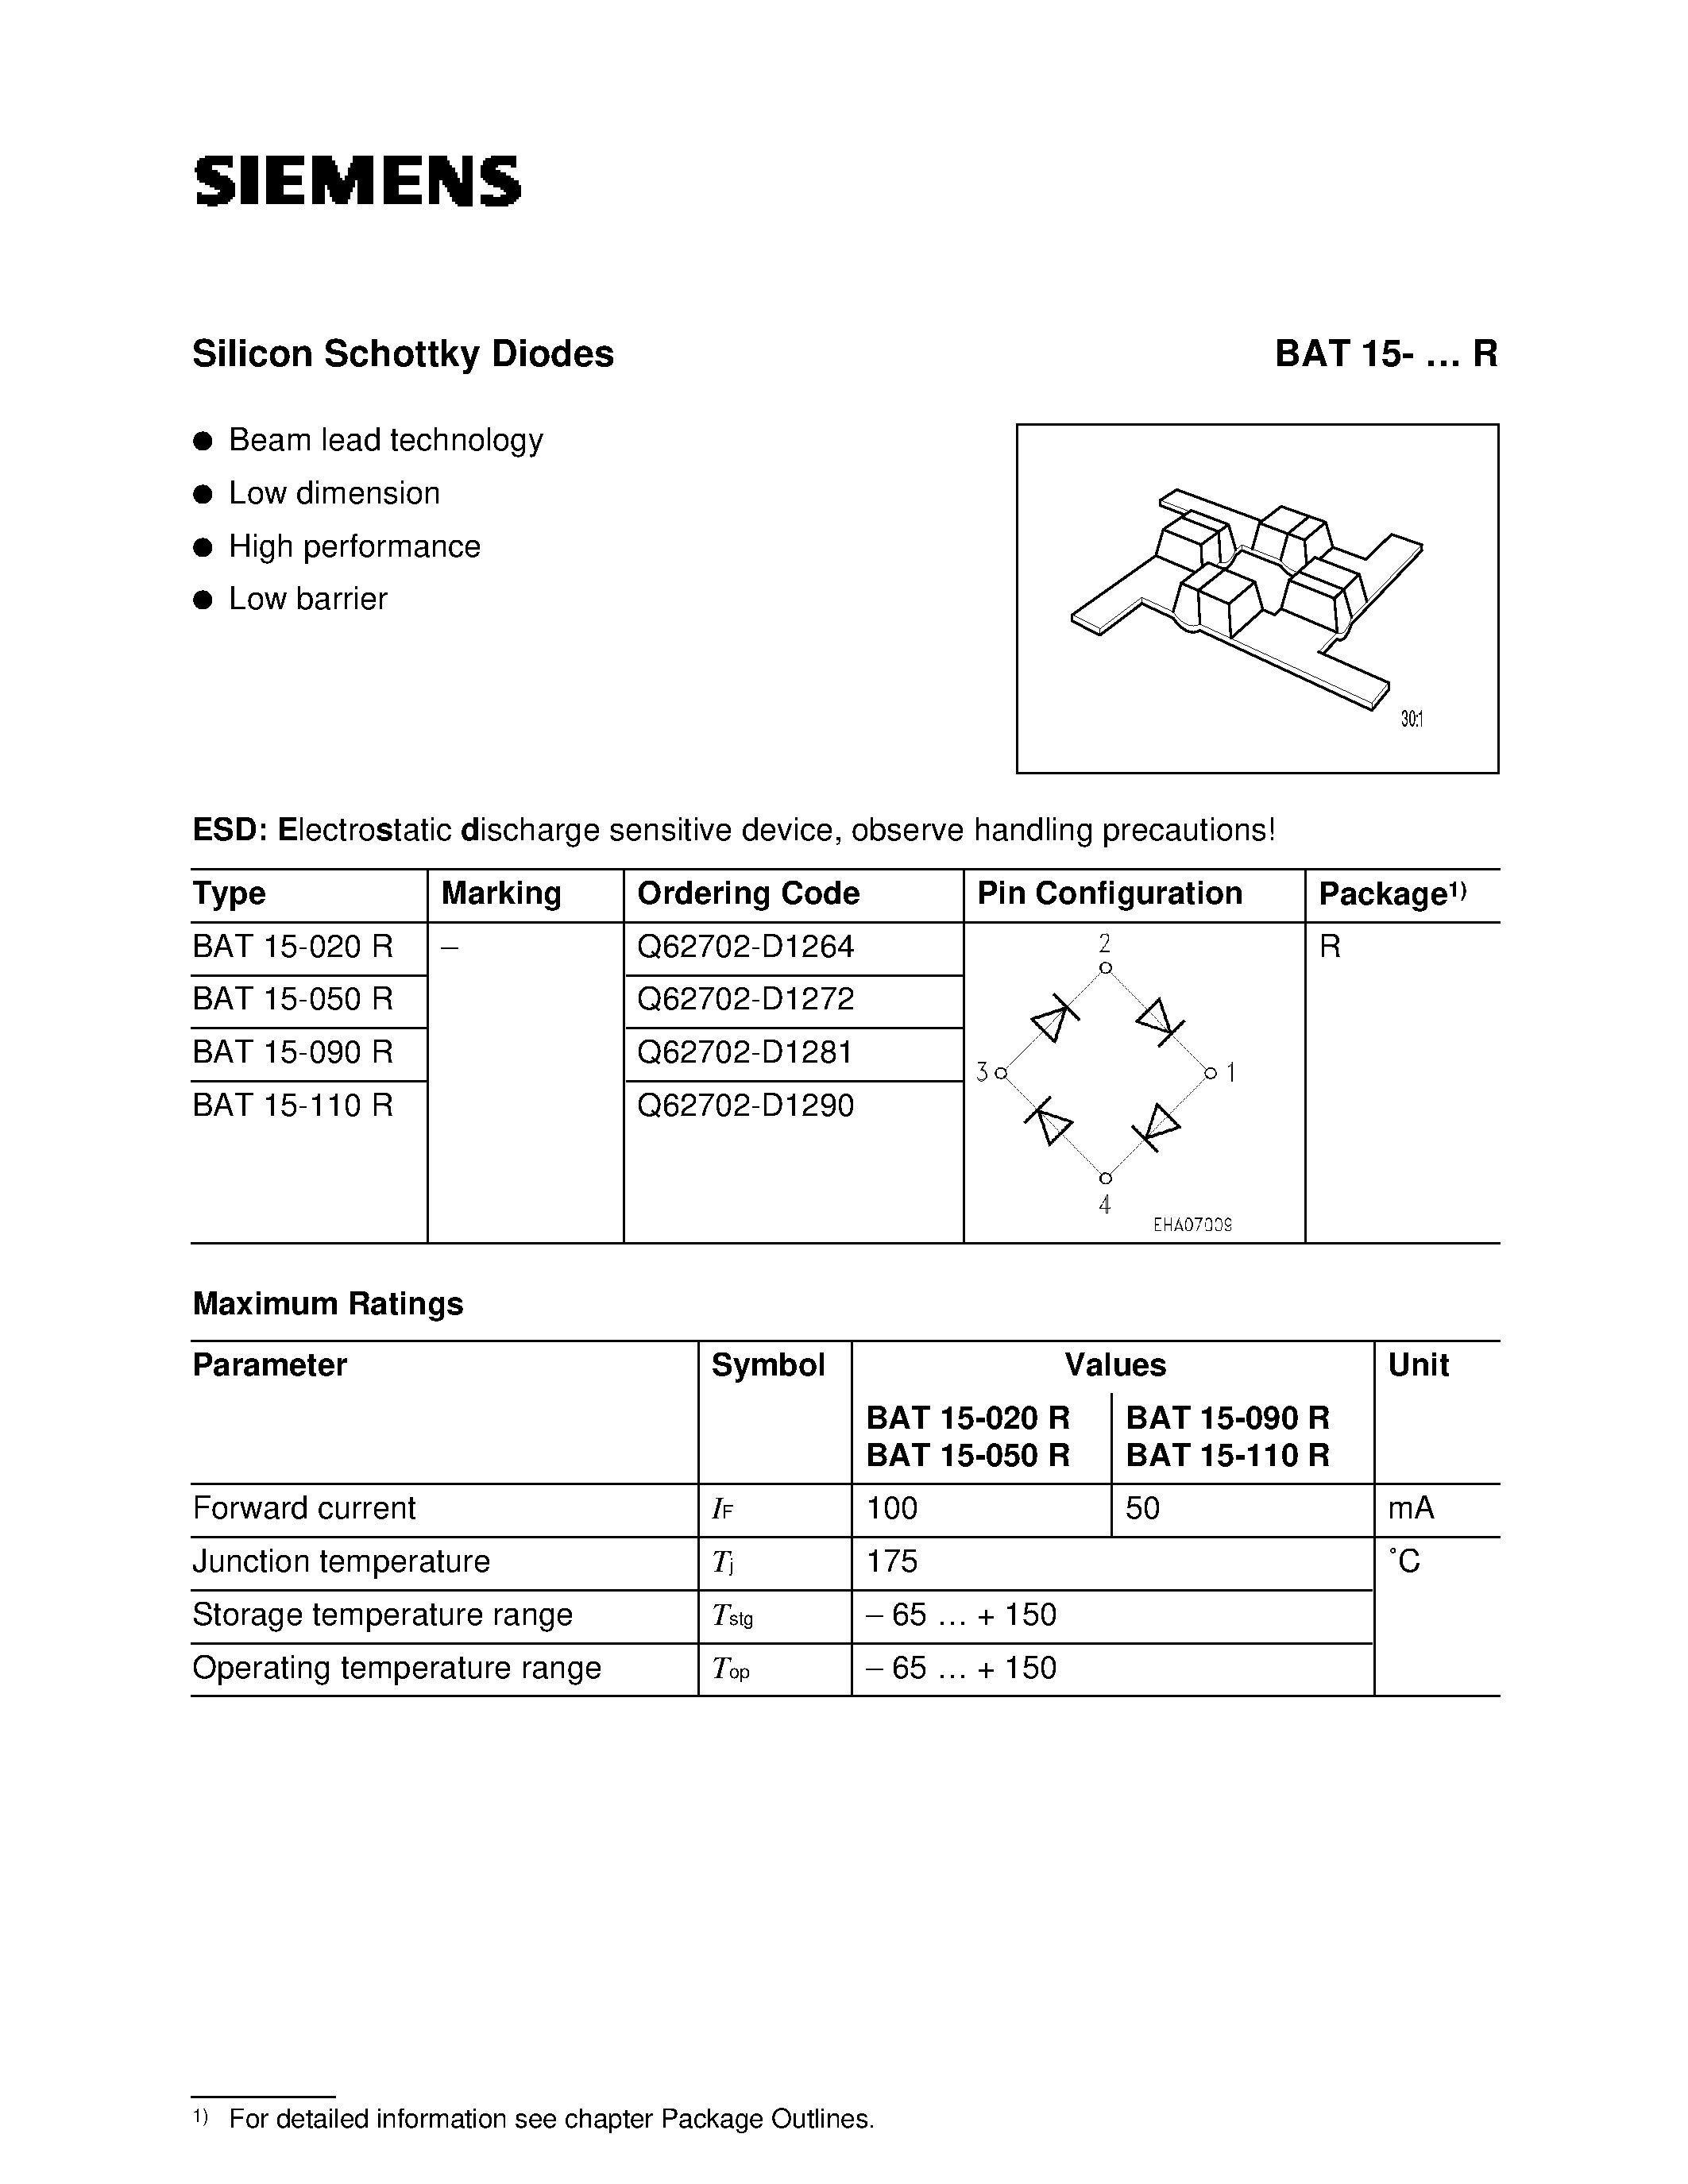 Datasheet BAT15-R - Silicon Schottky Diodes (Beam lead technology Low dimension High performance Low barrier) page 1